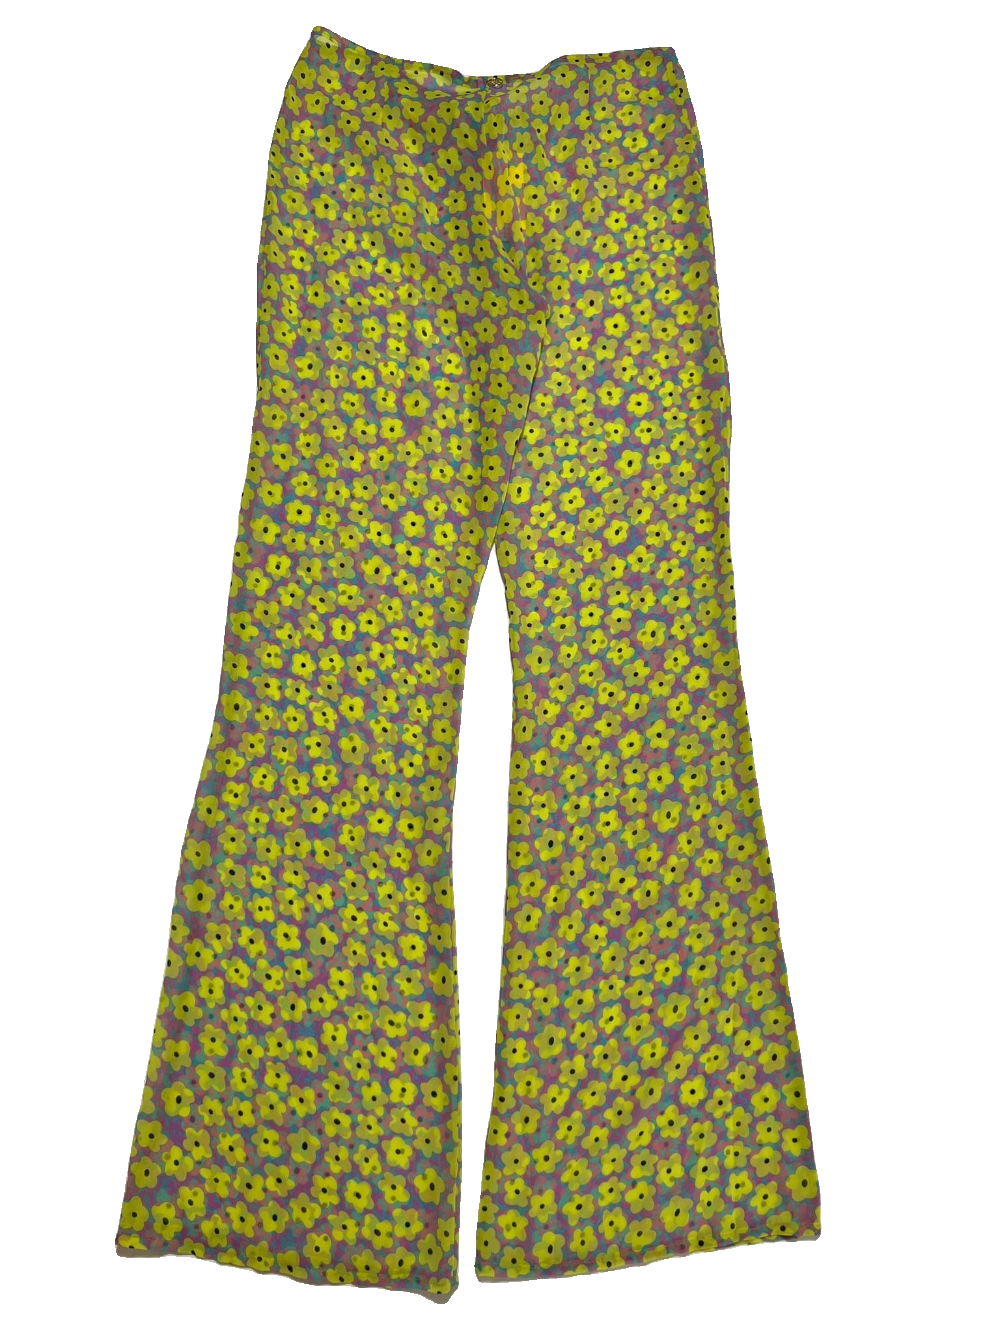 Bananhot- Green Floral Pants NEW WITH TAGS!